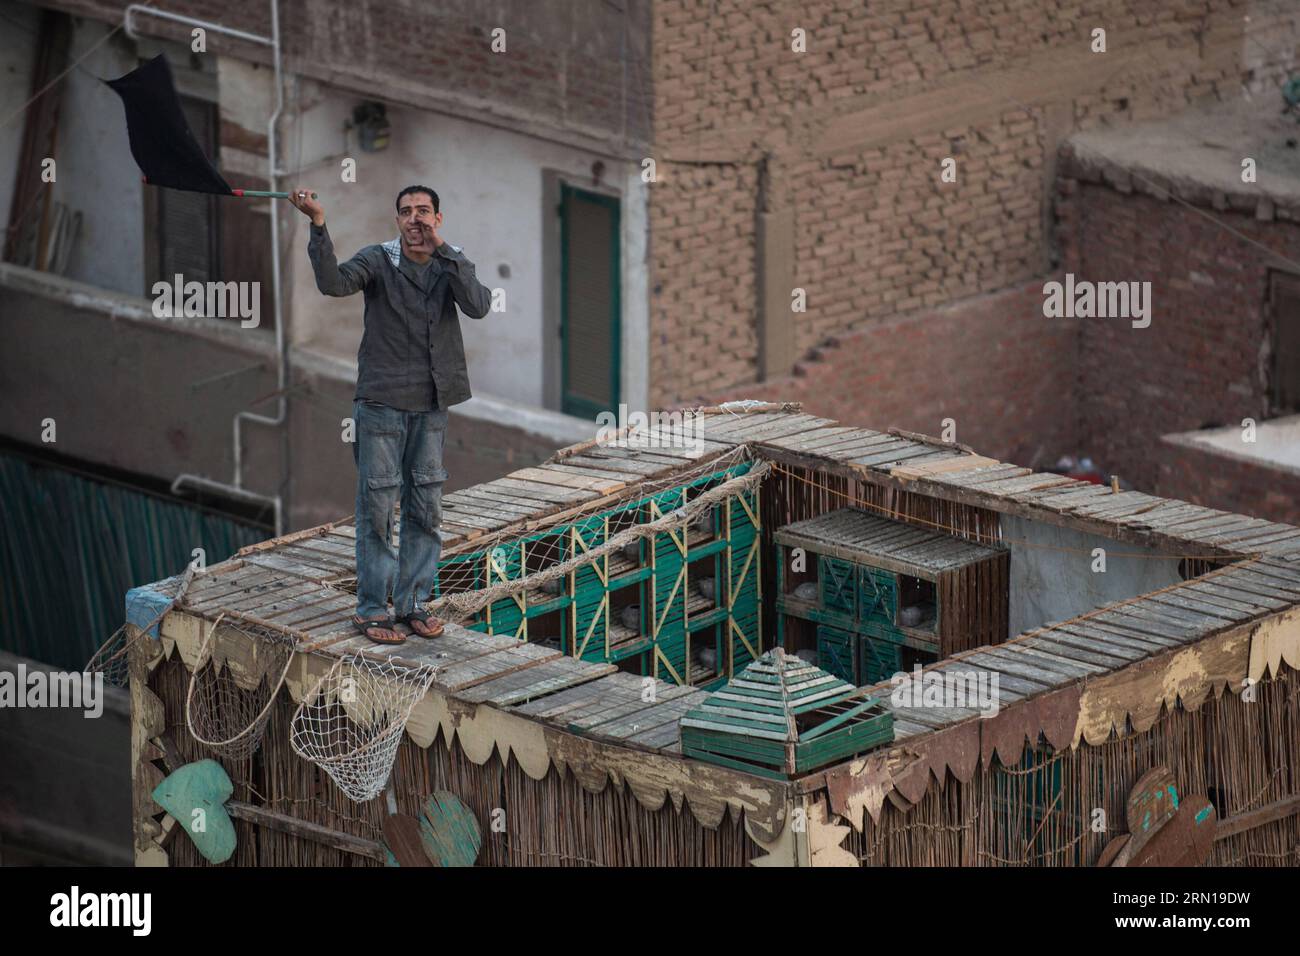 (141208) -- CAIRO,   Ahmed Gamal, 24, an Egyptian pigeon fancier, guides his pigeons on top of his pigeon loft in Mohandesen district, west of Cairo, Egypt, on Nov. 13, 2014. ) (lmz) EGYPT-CAIRO-PIGEON-FANCIER-FEATURE PanxChaoyue PUBLICATIONxNOTxINxCHN   Cairo Ahmed Gamal 24 to Egyptian Pigeon fancier Guides His pigeons ON Top of His Pigeon Loft in  District WEST of Cairo Egypt ON Nov 13 2014  Egypt Cairo Pigeon fancier Feature  PUBLICATIONxNOTxINxCHN Stock Photo